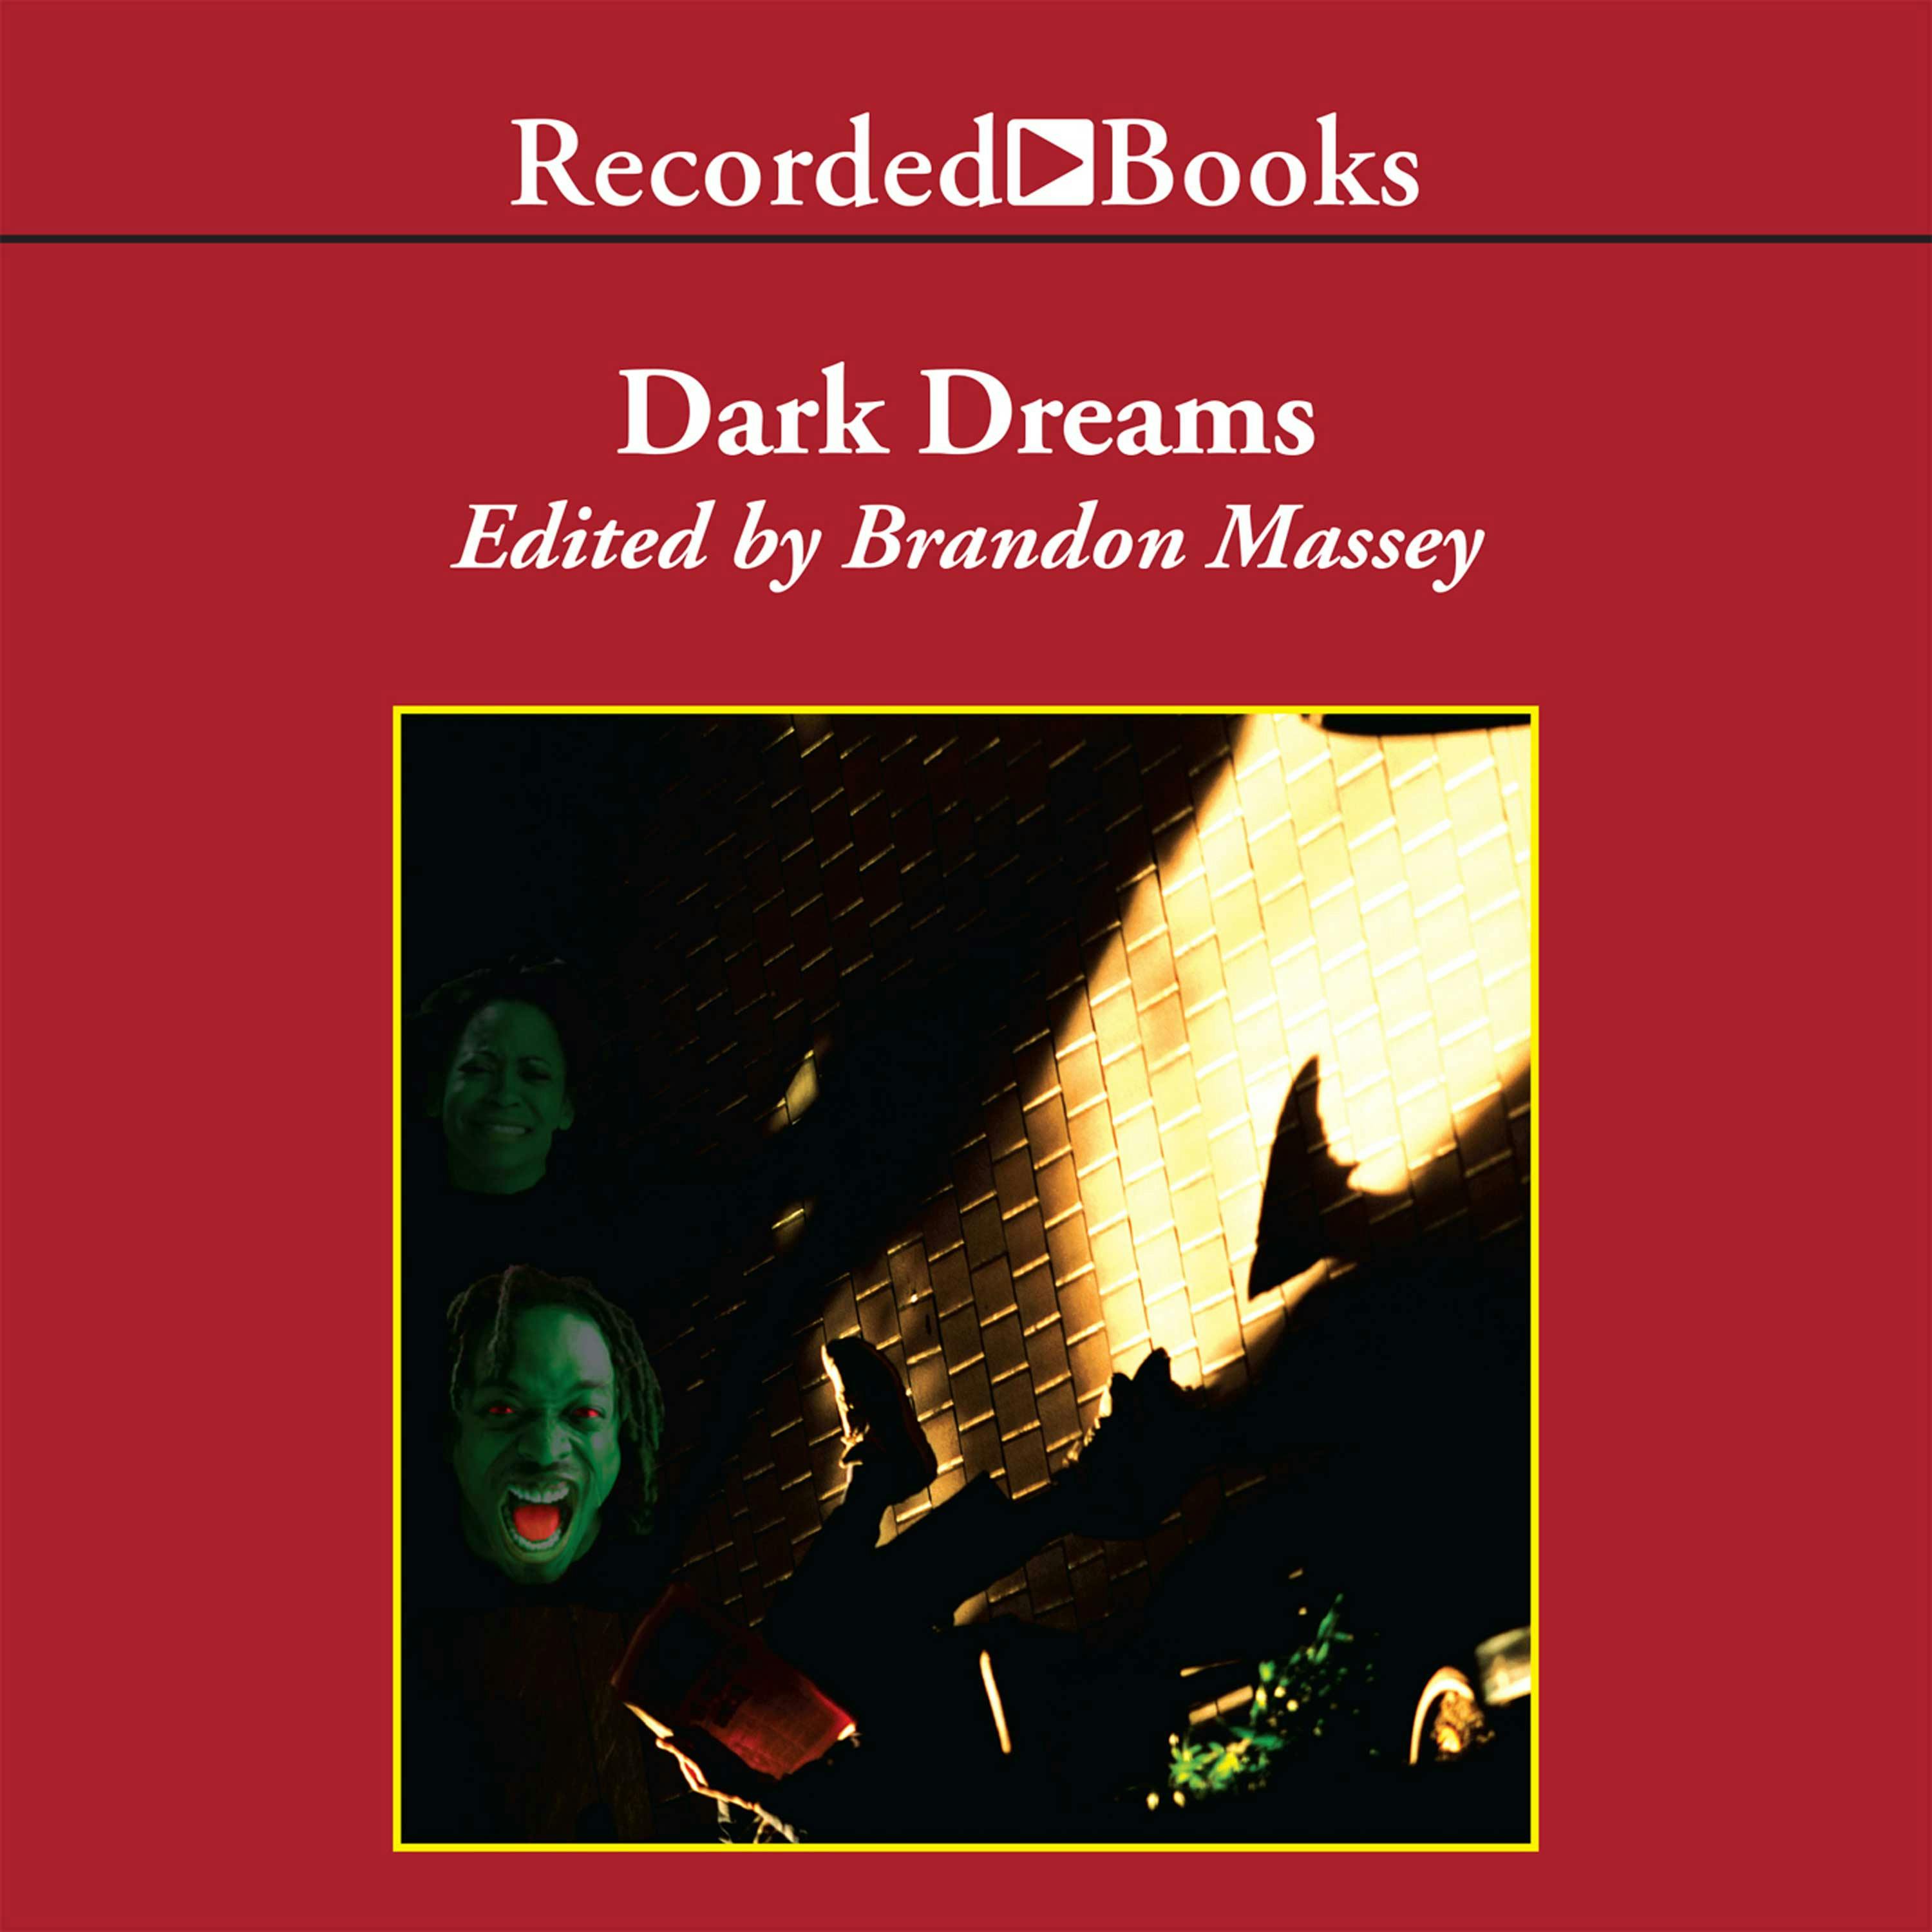 Dark Dreams: A Collection of Horror and Suspense by Black Writers - Zane, Tananarive Due, Multiple Authors